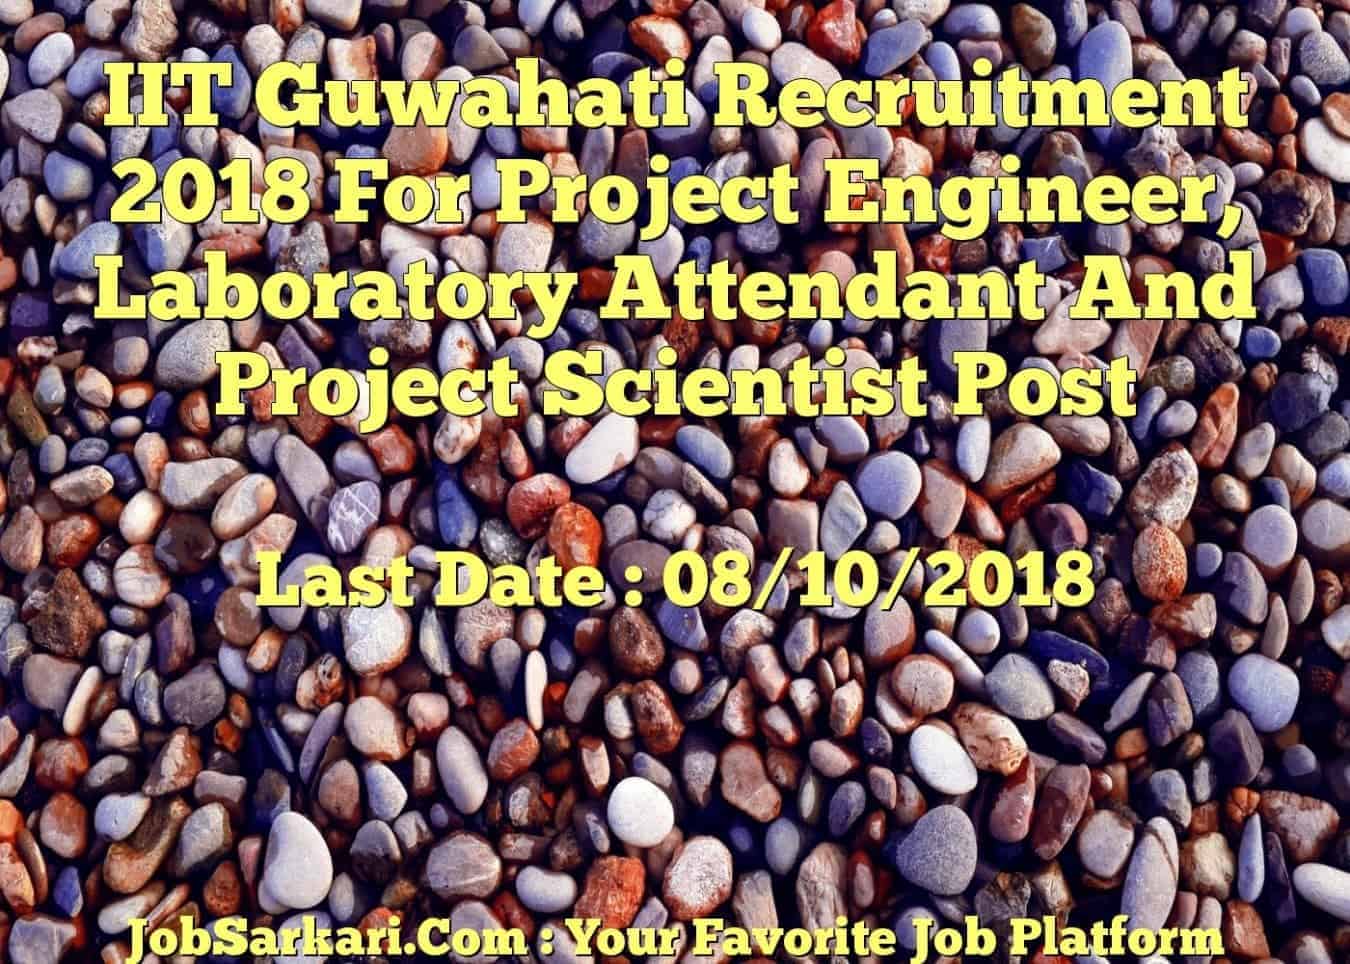 IIT Guwahati Recruitment 2018 For Project Engineer, Laboratory Attendant And Project Scientist Post